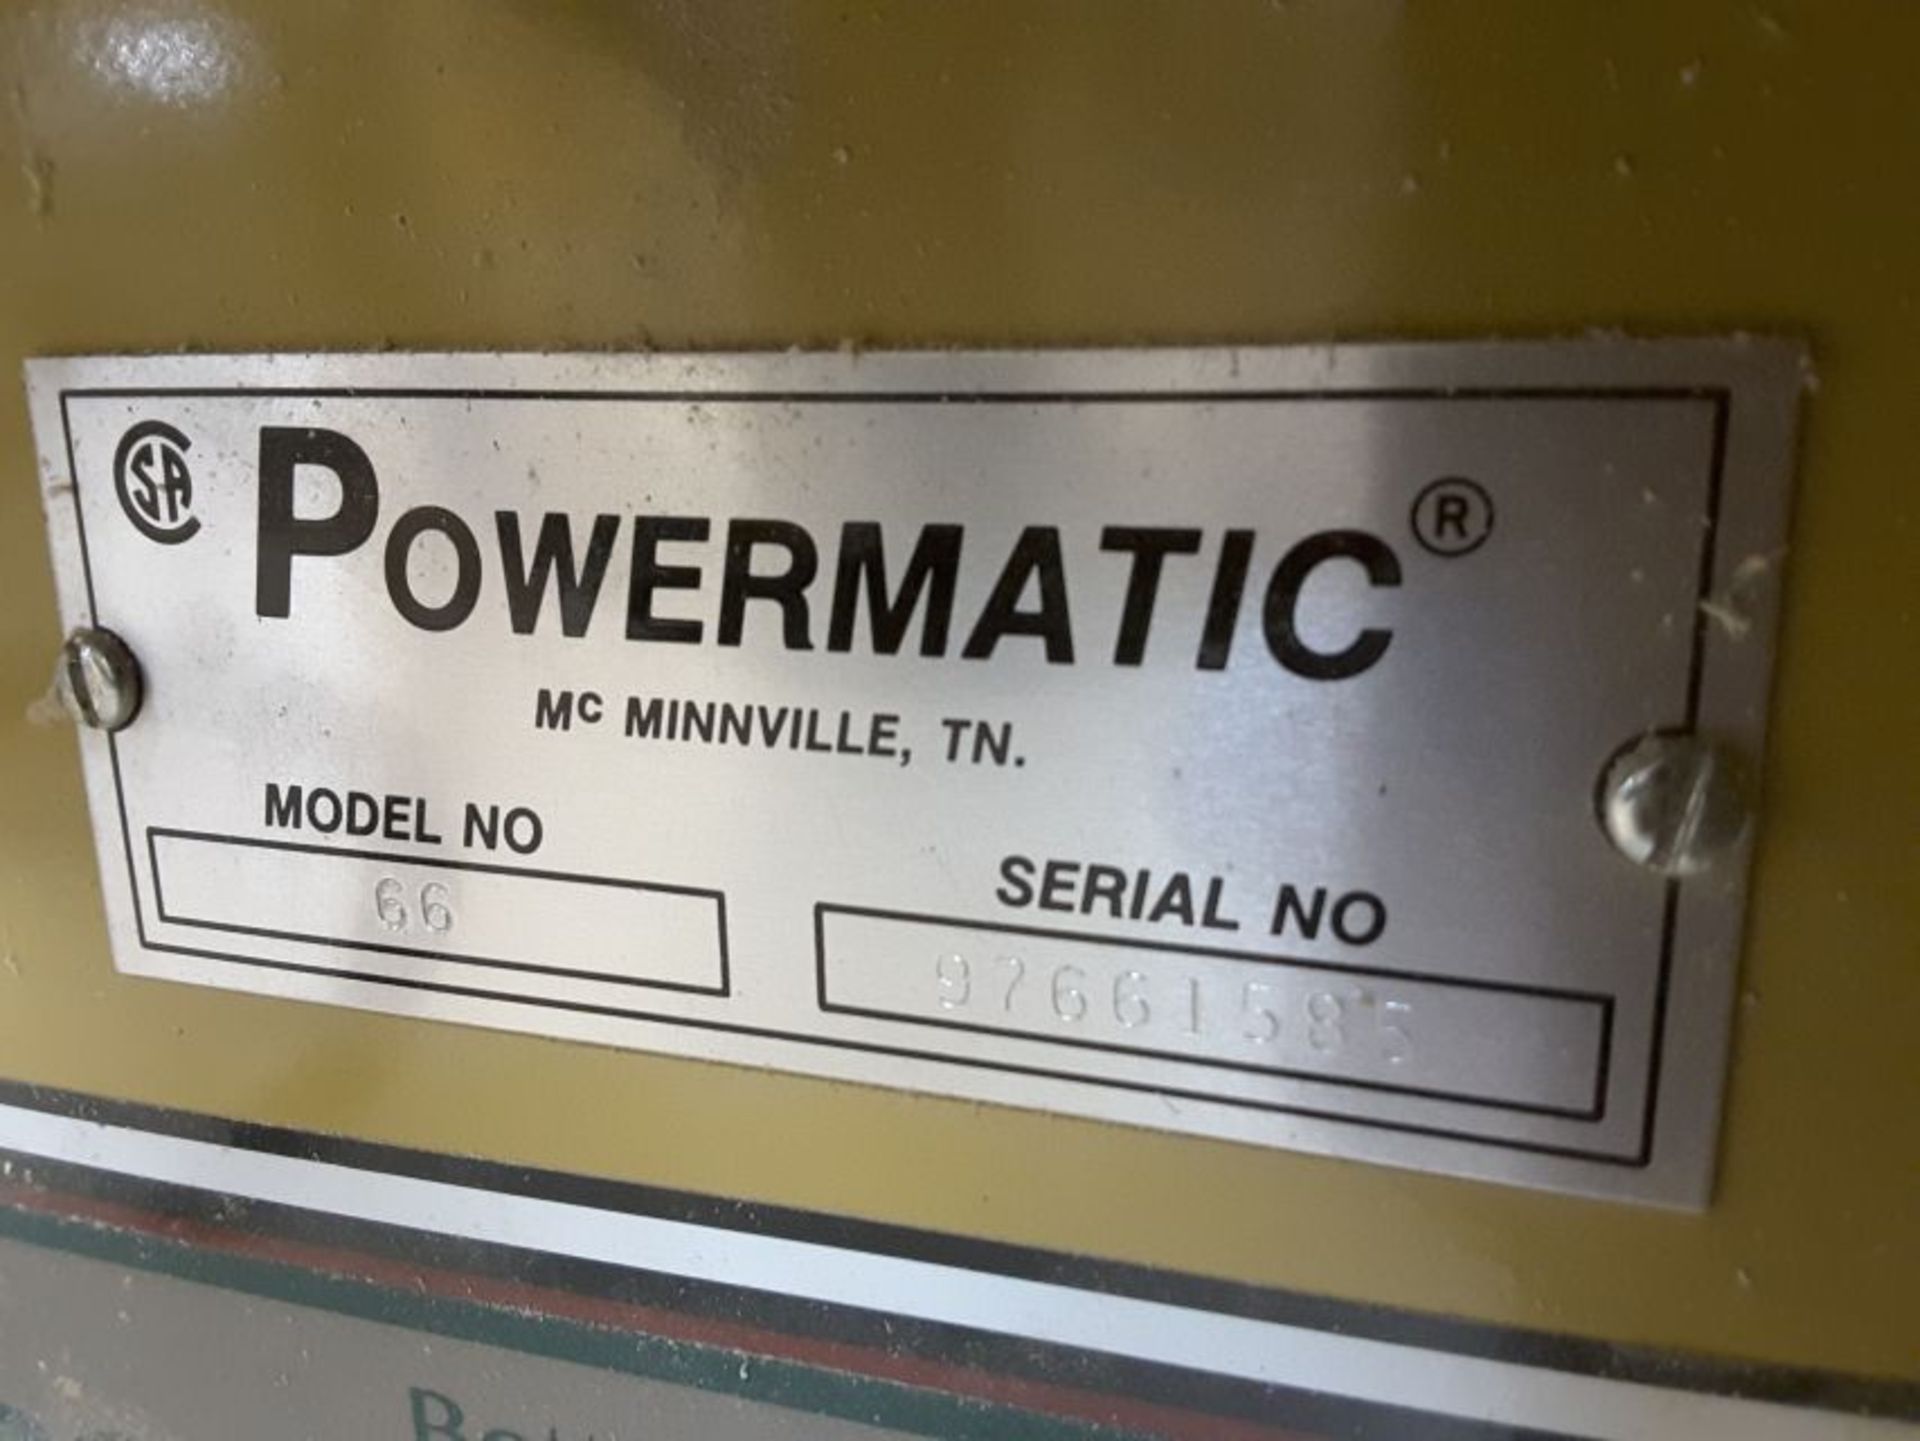 Powermatic model 66 single phase table saw with powermatic fence - Image 3 of 3